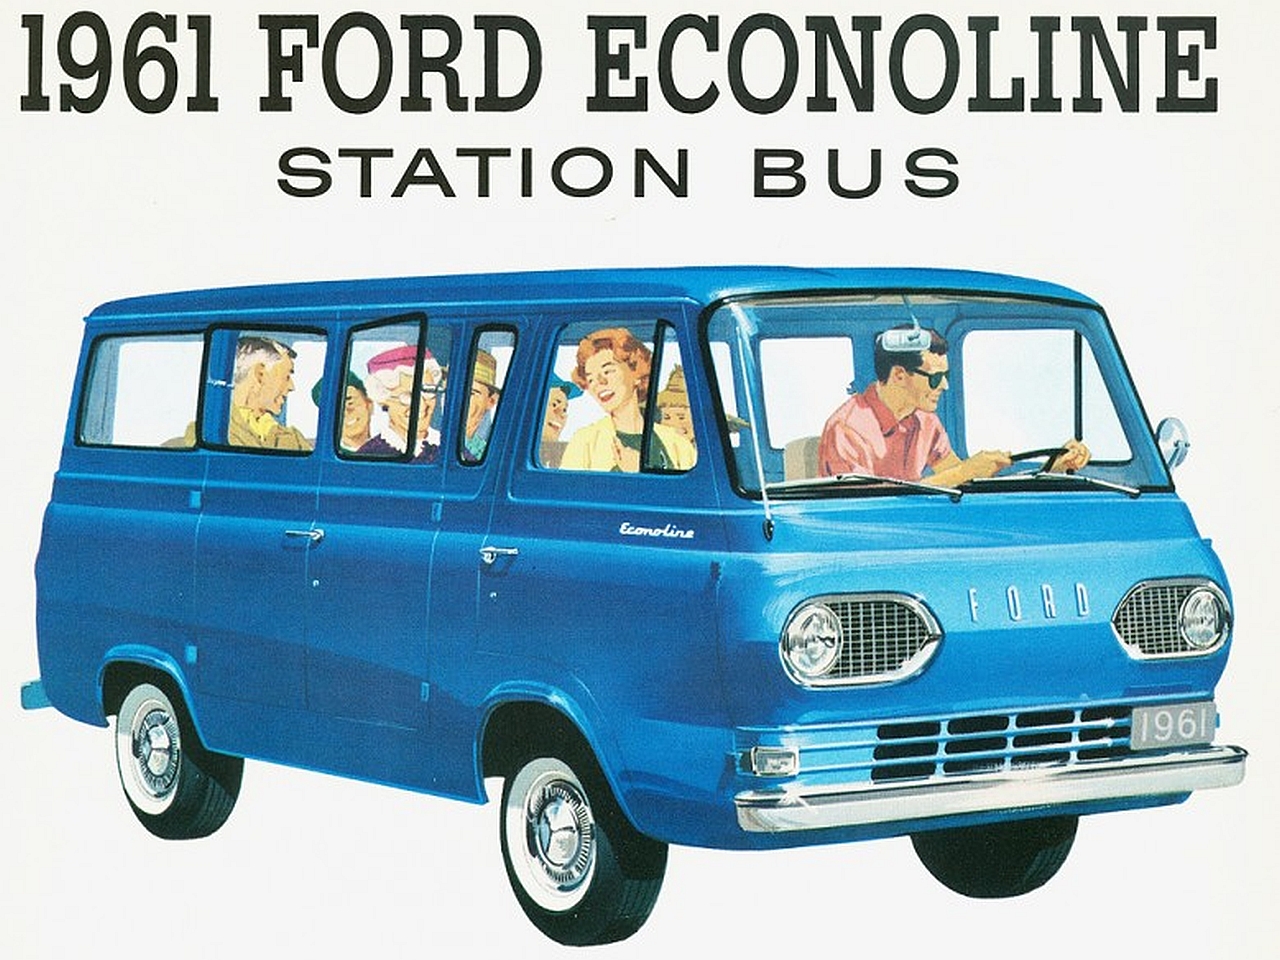 1961 ford econoline Picture - Image Abyss